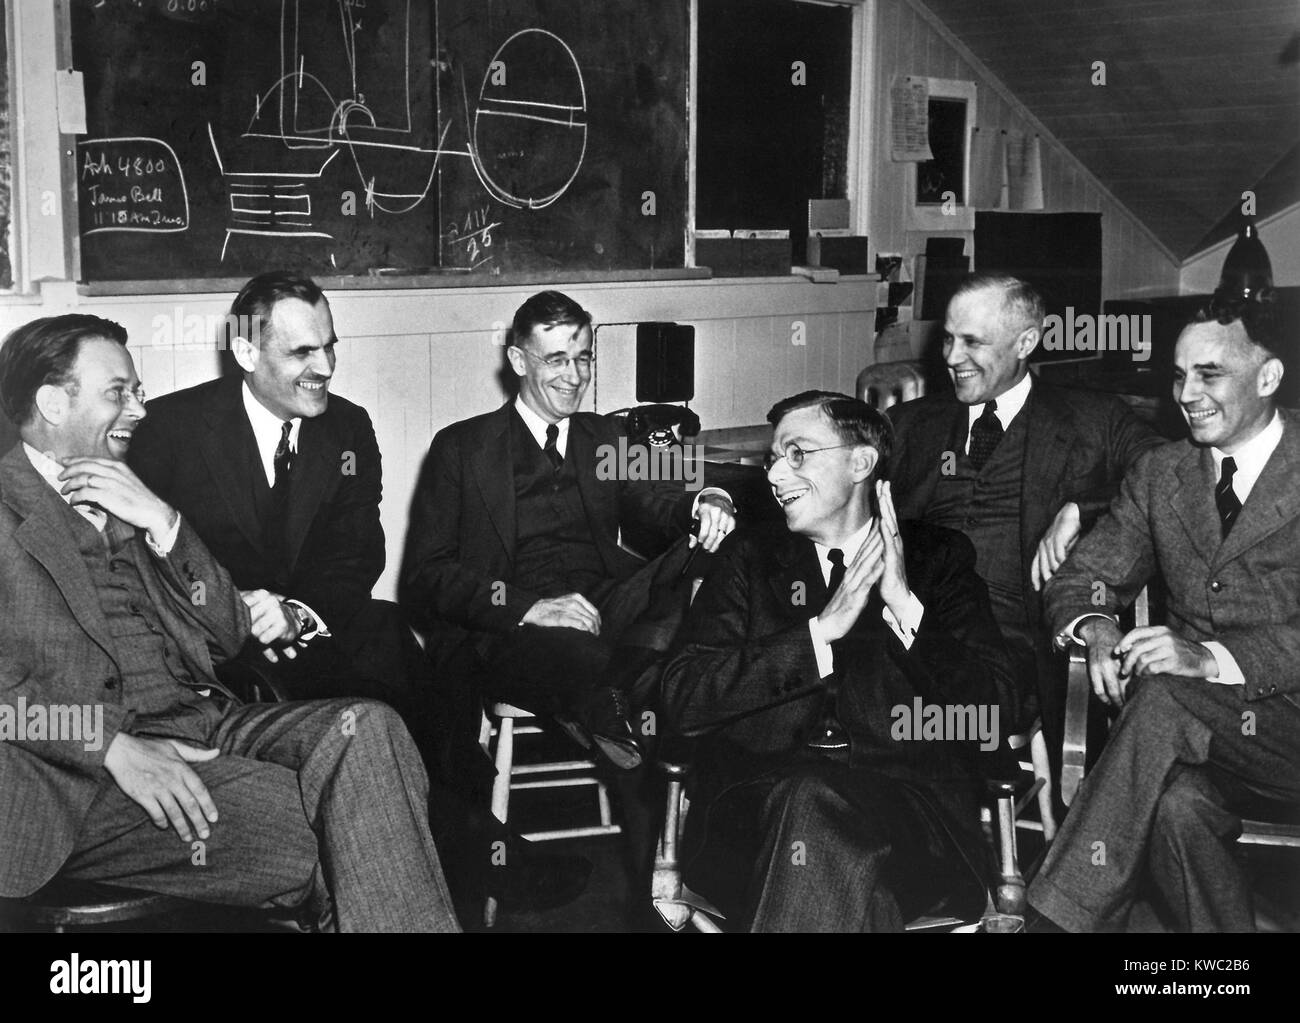 1940 meeting of nuclear physicists at the Radiation Laboratory at the University of California. L-R: Ernest Lawrence, Arthur Compton, Vannevar Bush, James Conant, Karl Compton, and Alfred Loomis. (BSLOC 2015 2 20) Stock Photo